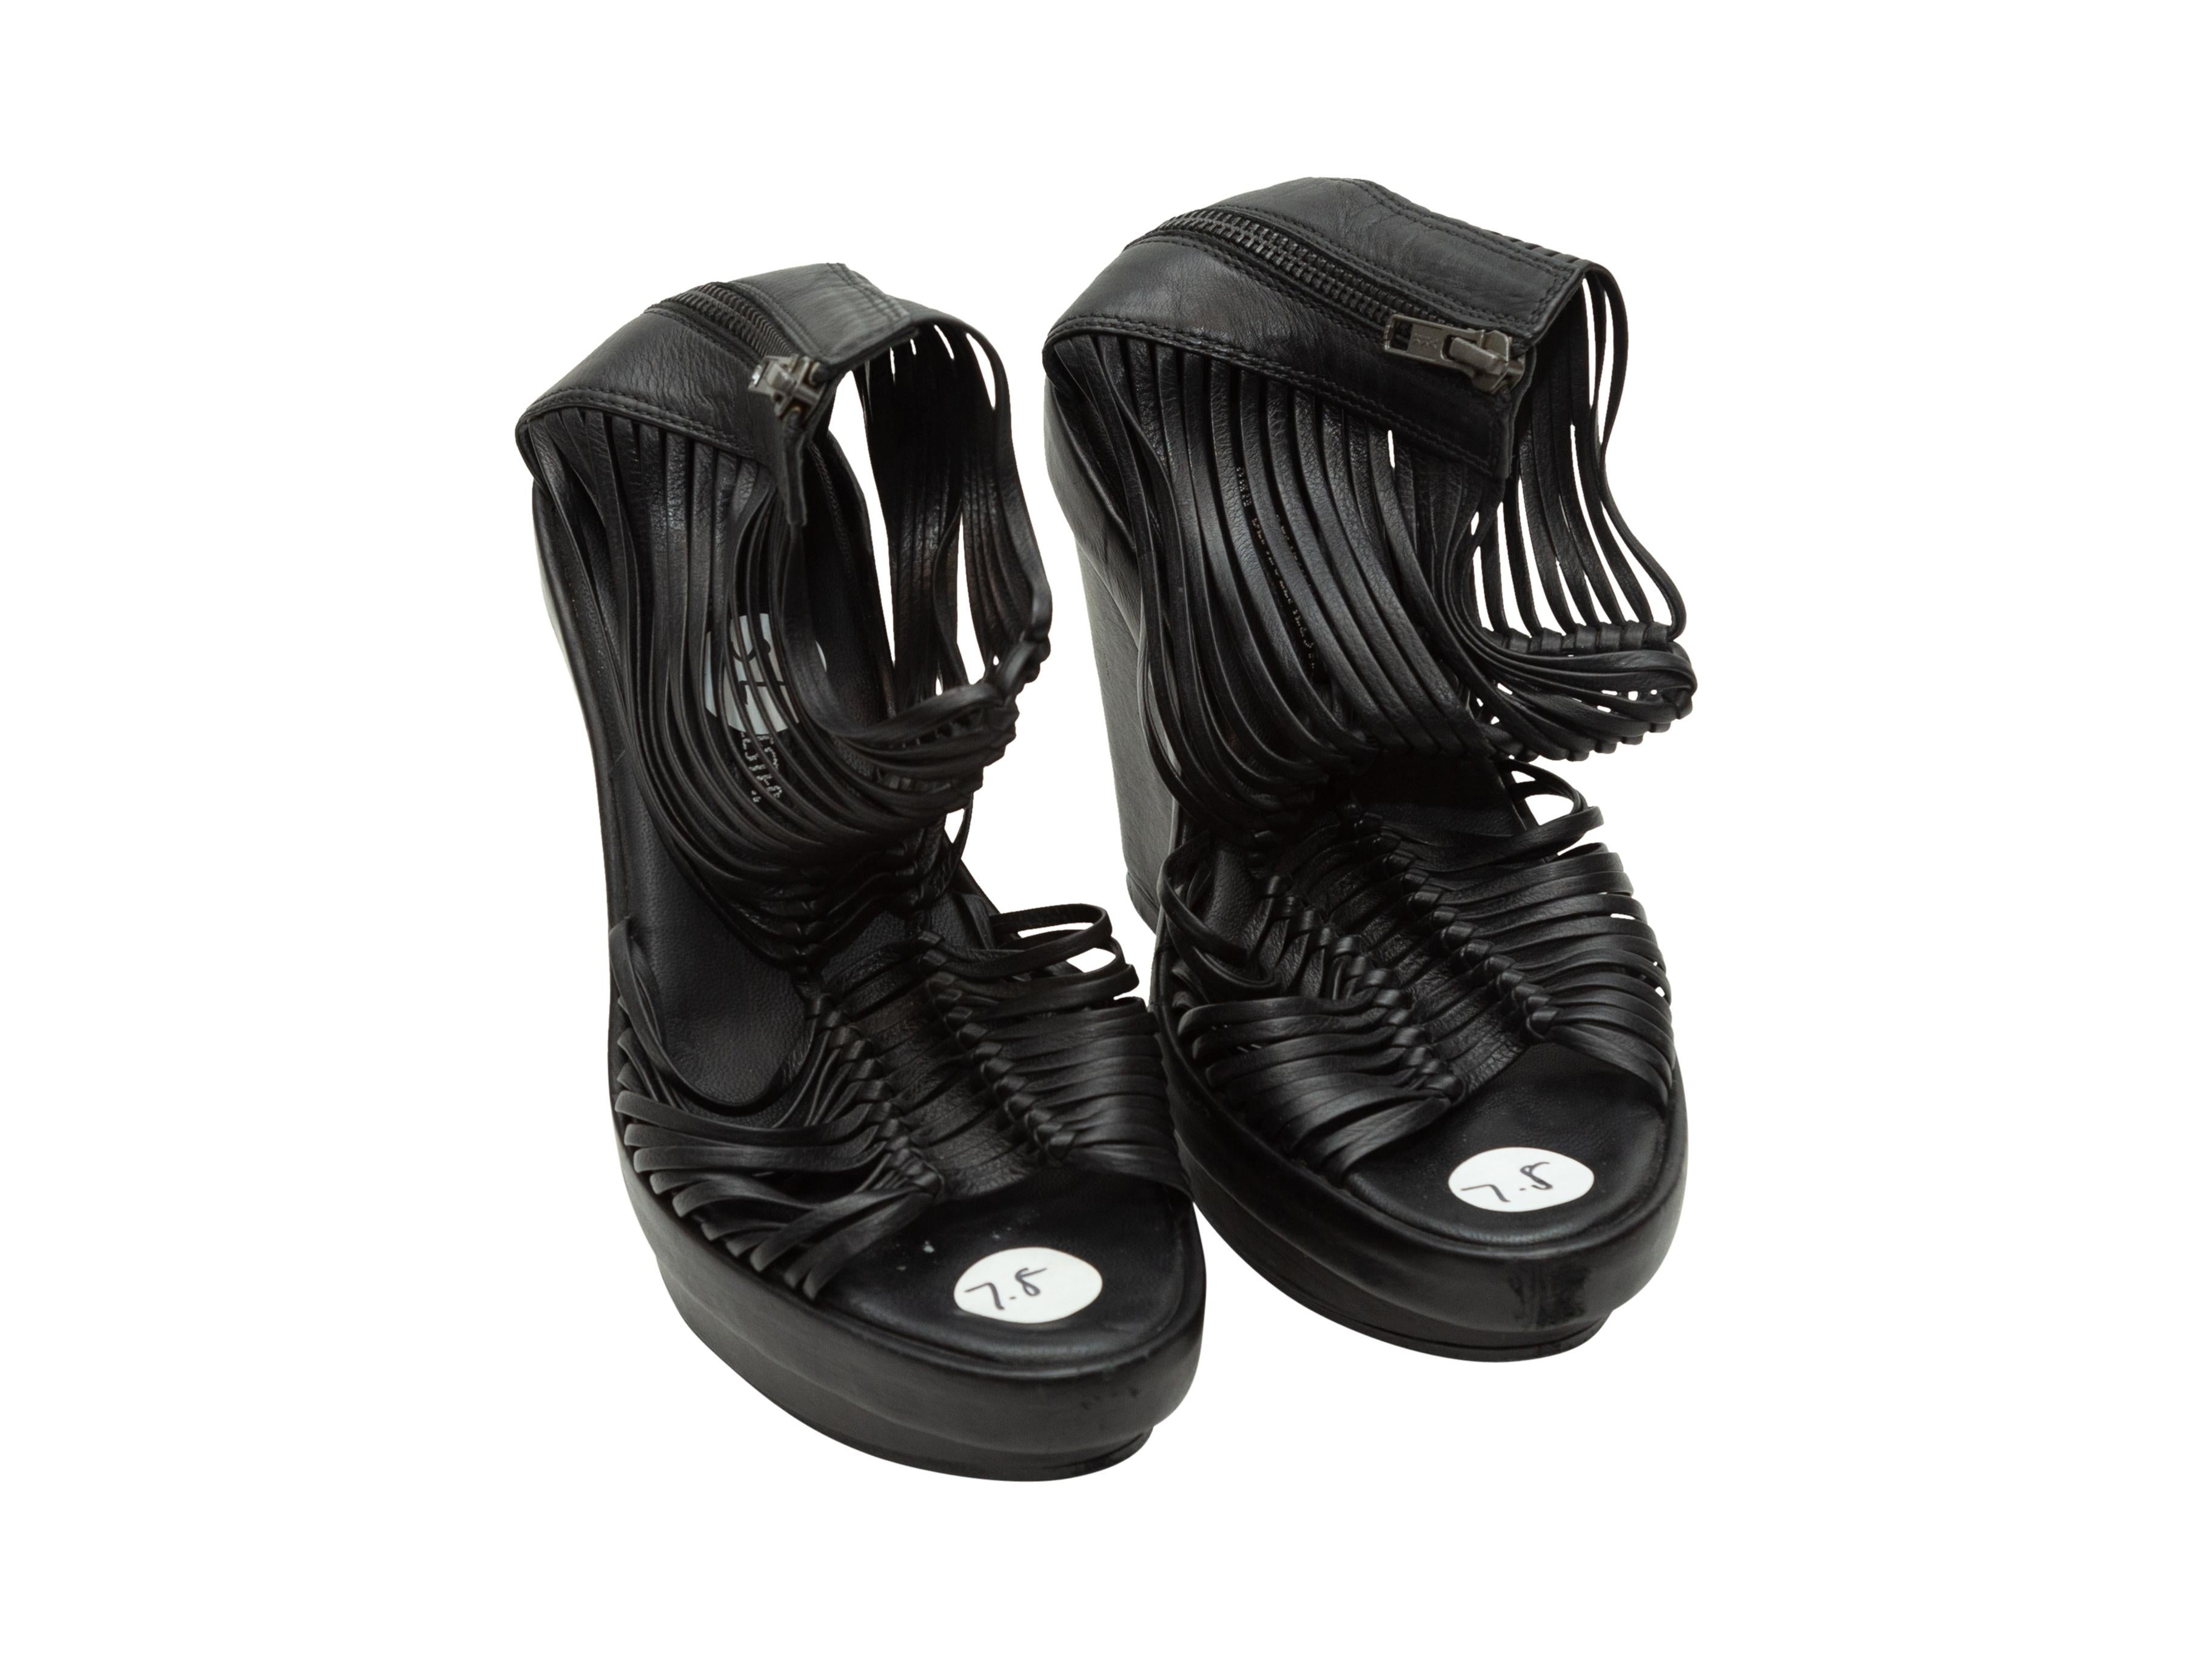 Product details: Black leather cage sandals by Ann Demeulemeester. Wedge heels. Zip closures at backs. Designer size 37.5. 5